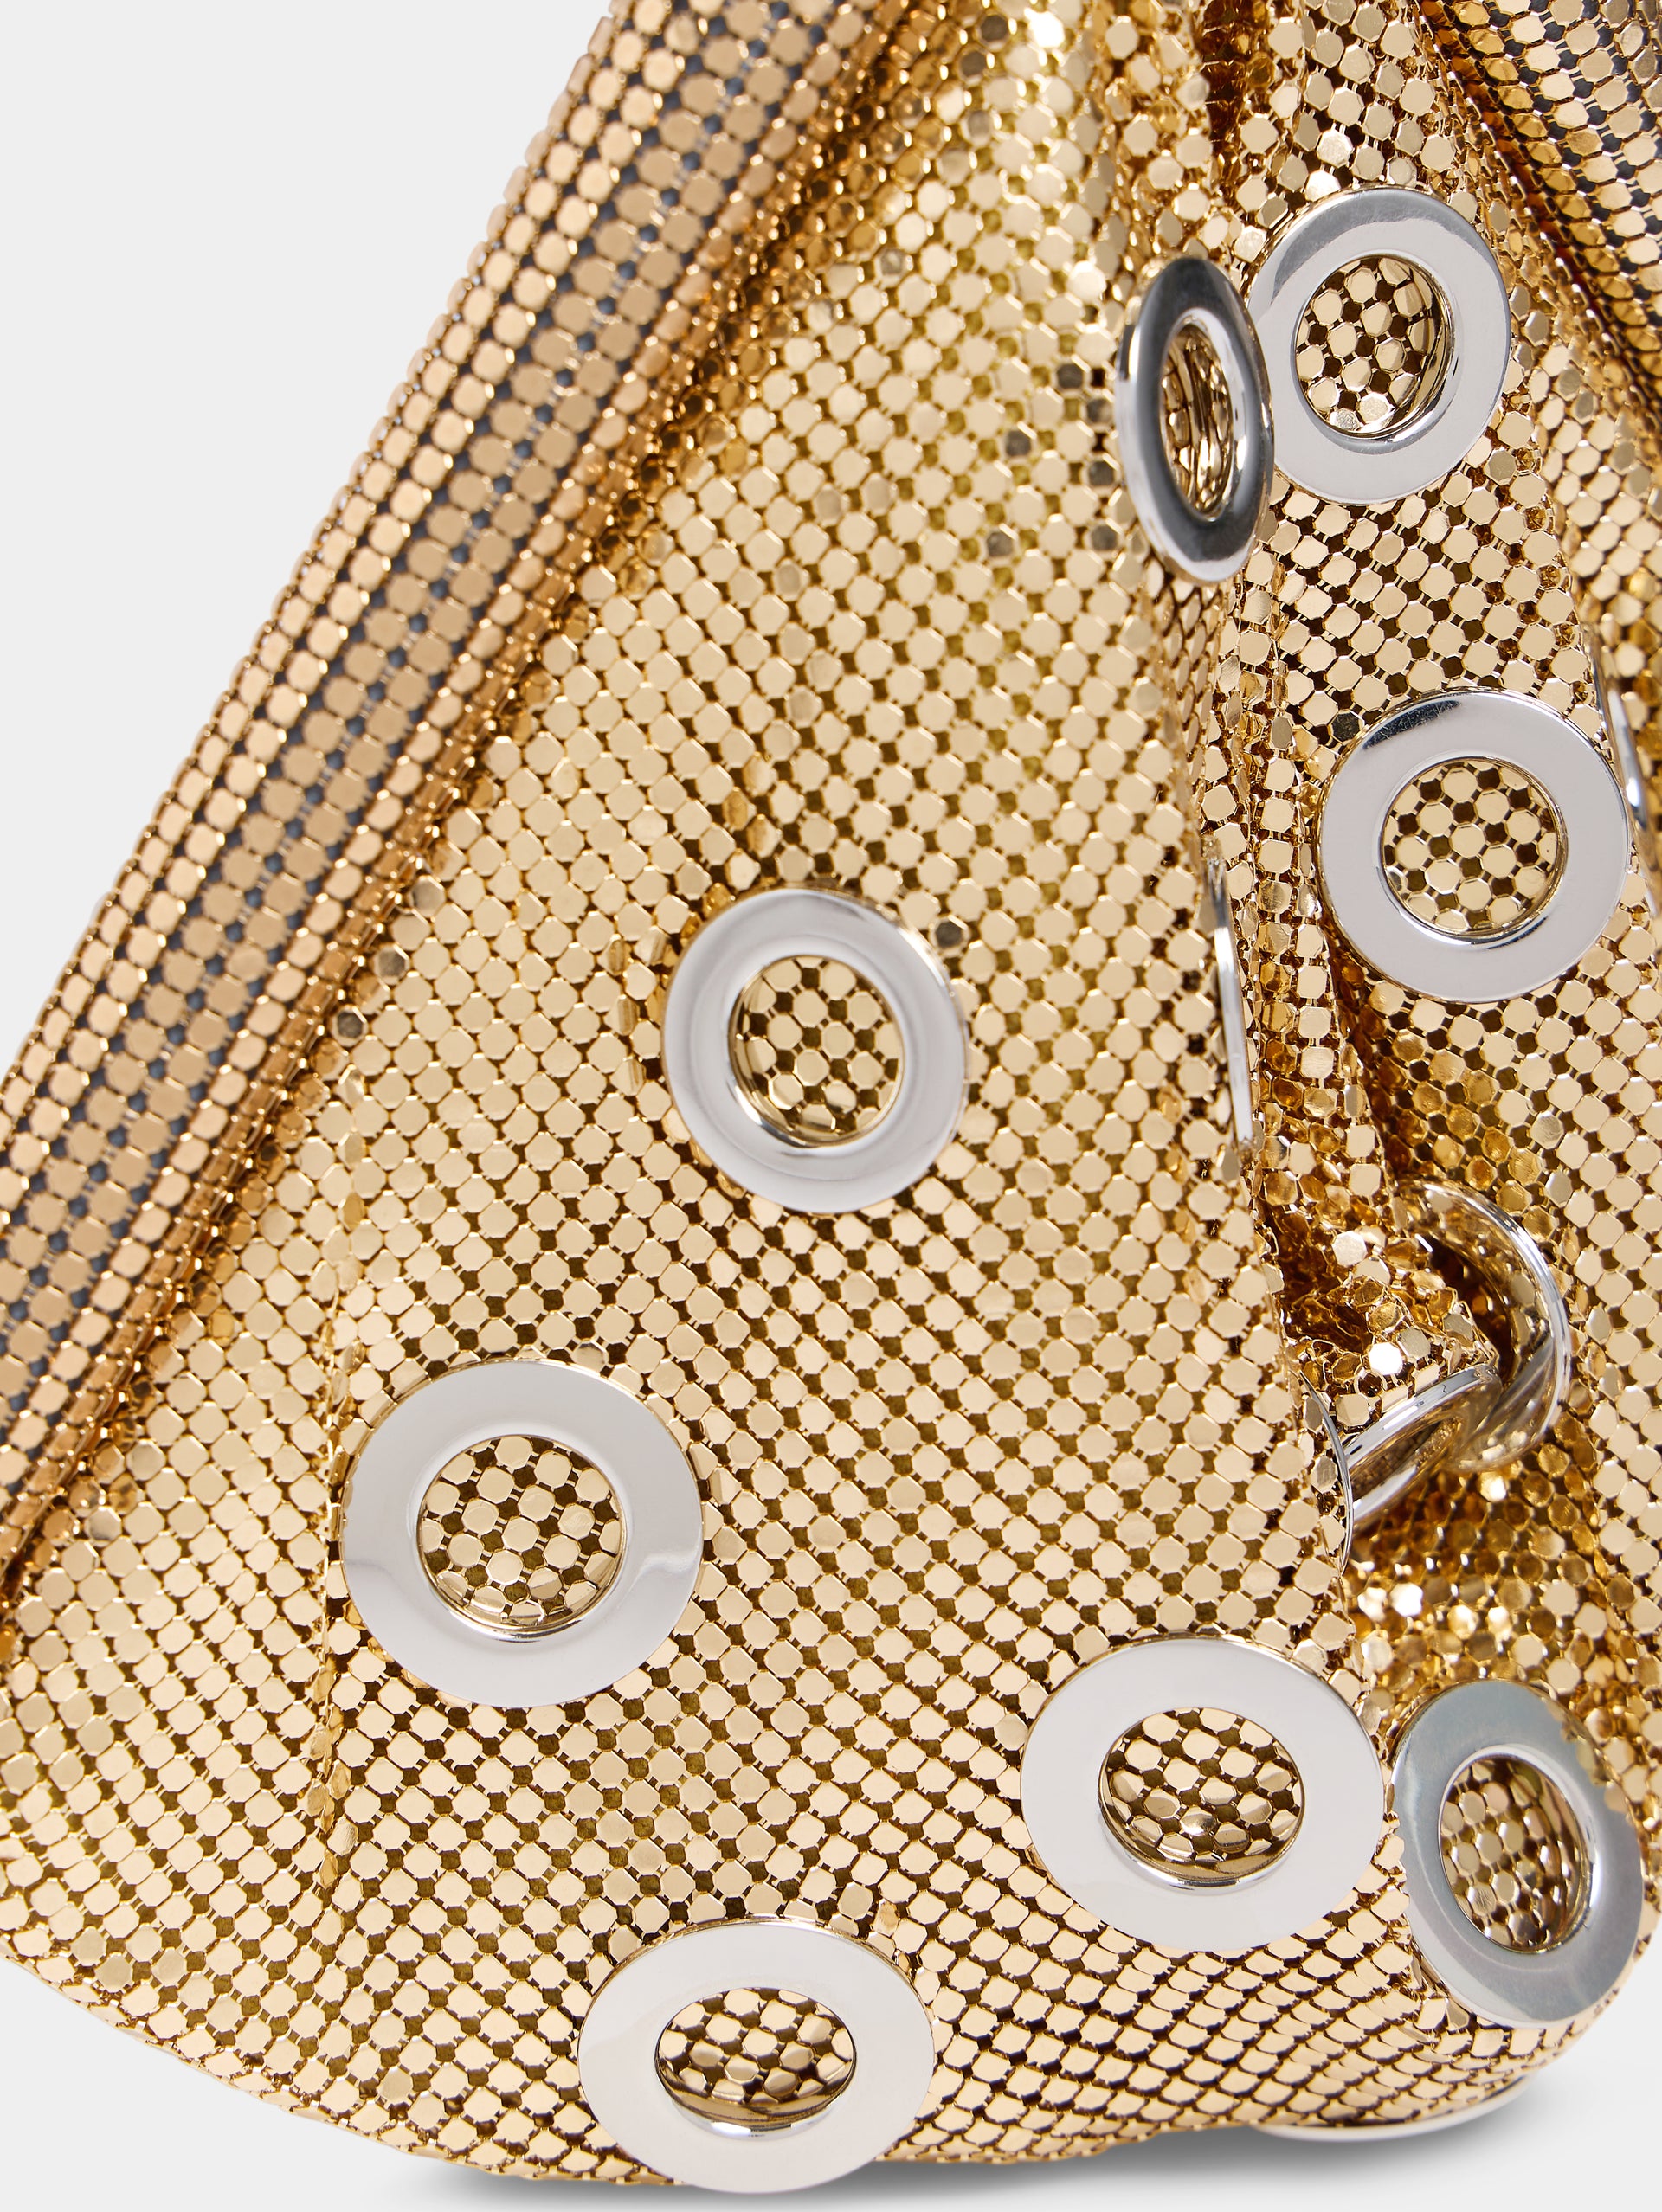 Golden chainmail clutch bag with metallic eyelets